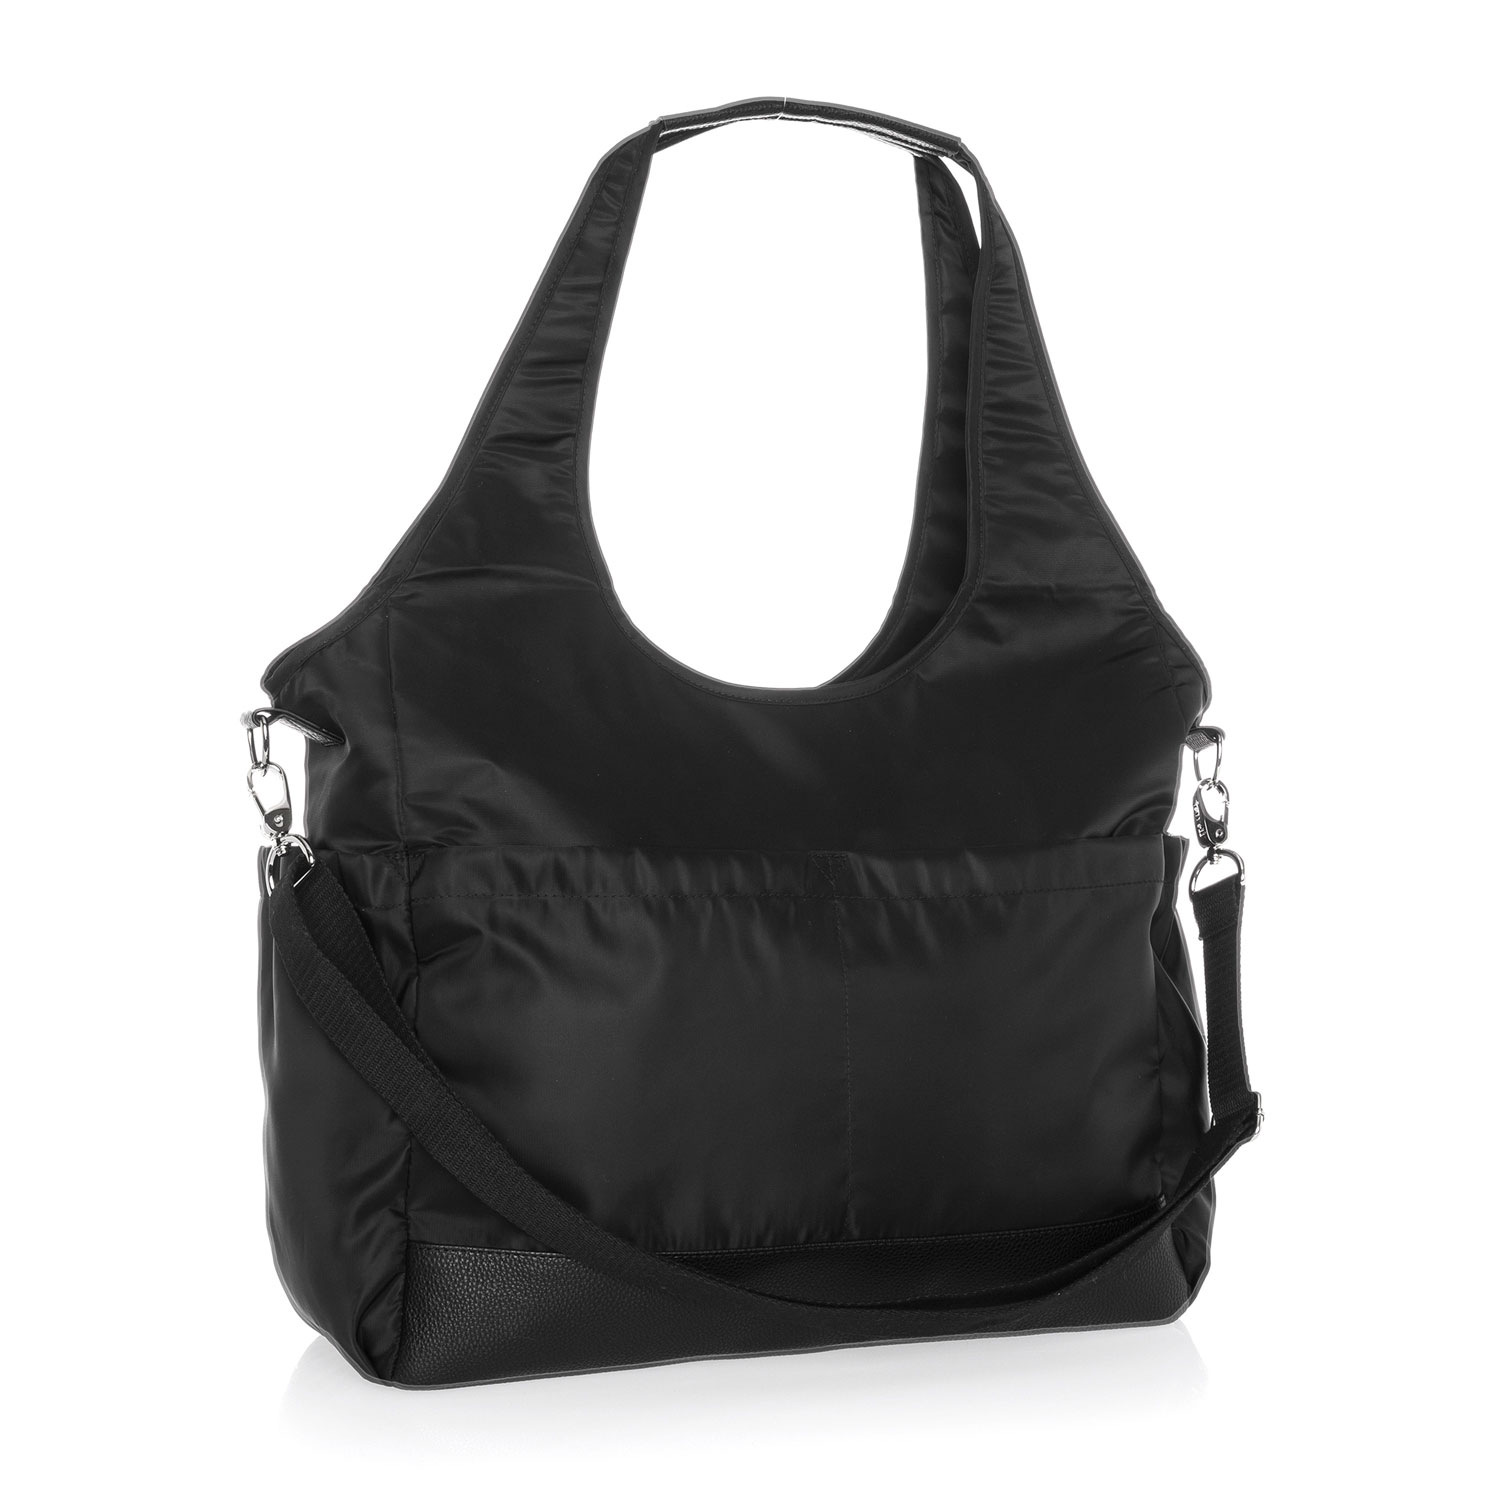 City Park Bag - Thirty-One Gifts 